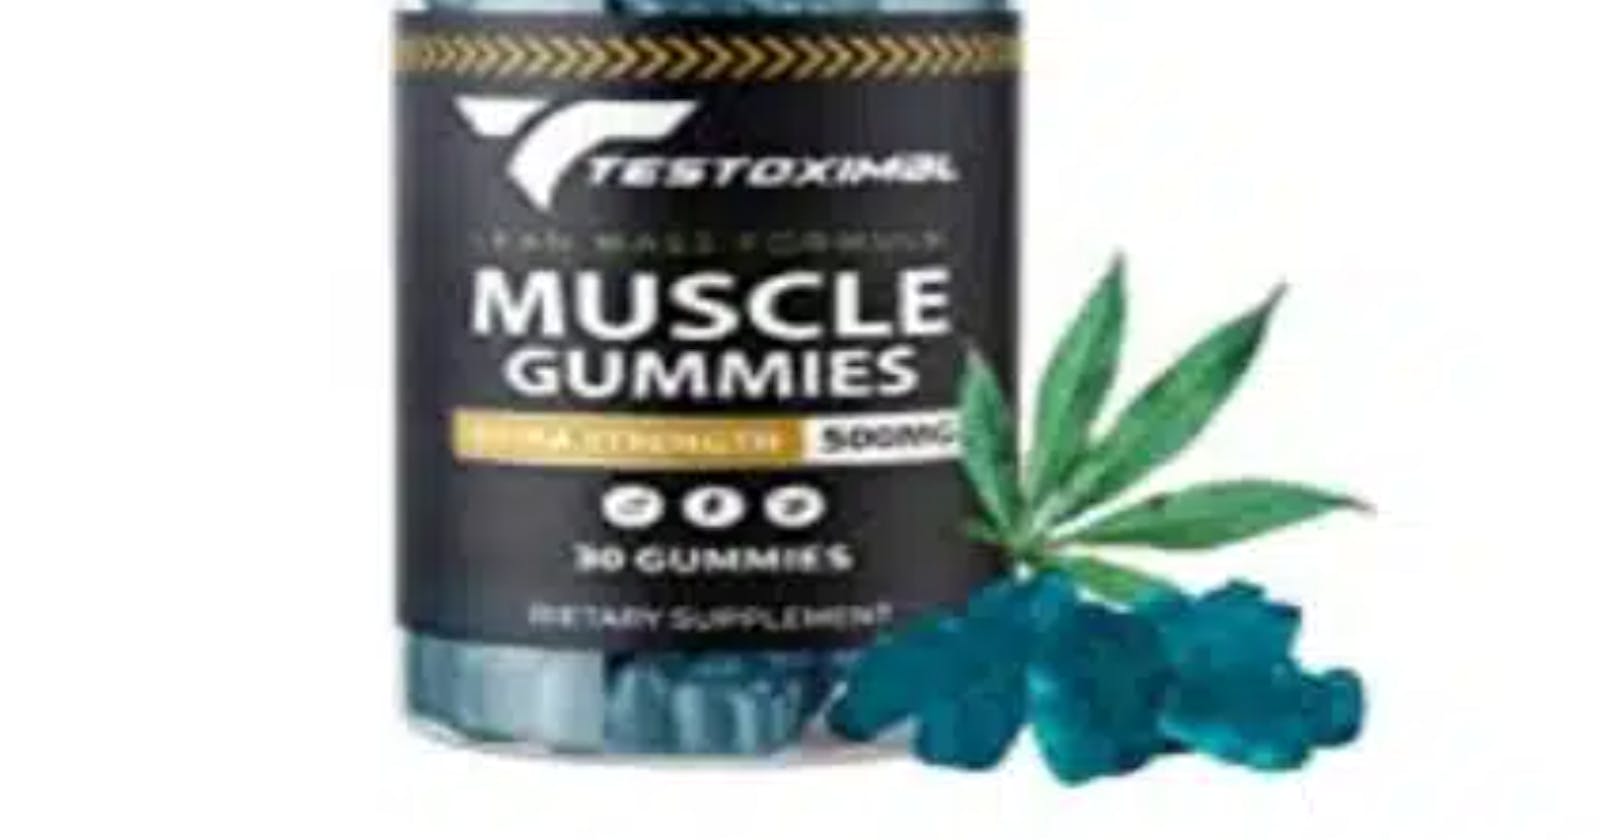 Testoximal Muscle Gummies Reviews 2023 - Shocking Results, Side Effects, Benefits, Official Website & Where to Buy?